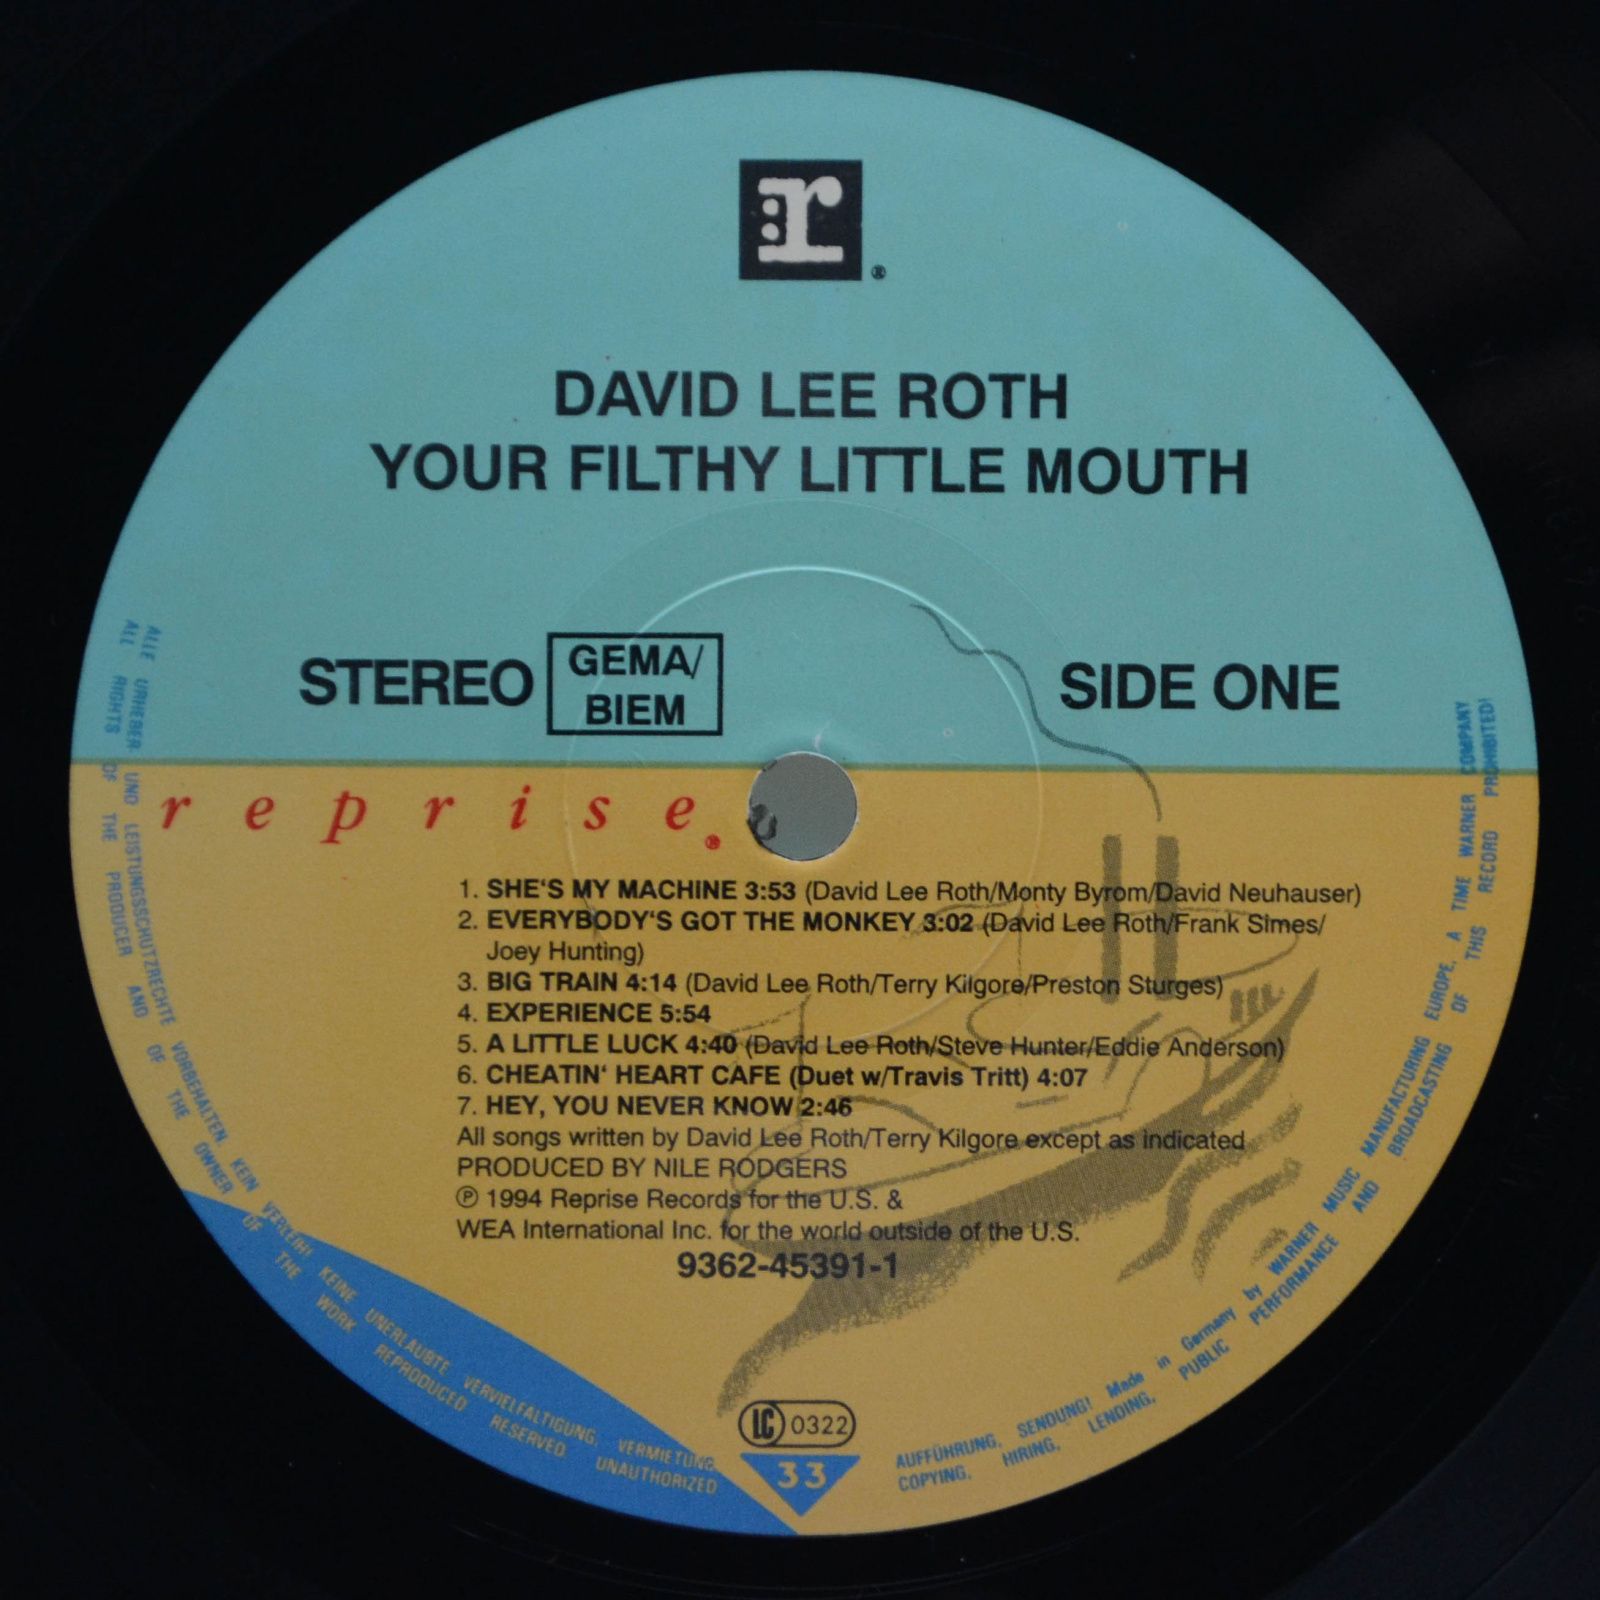 David Lee Roth — Your Filthy Little Mouth, 1994